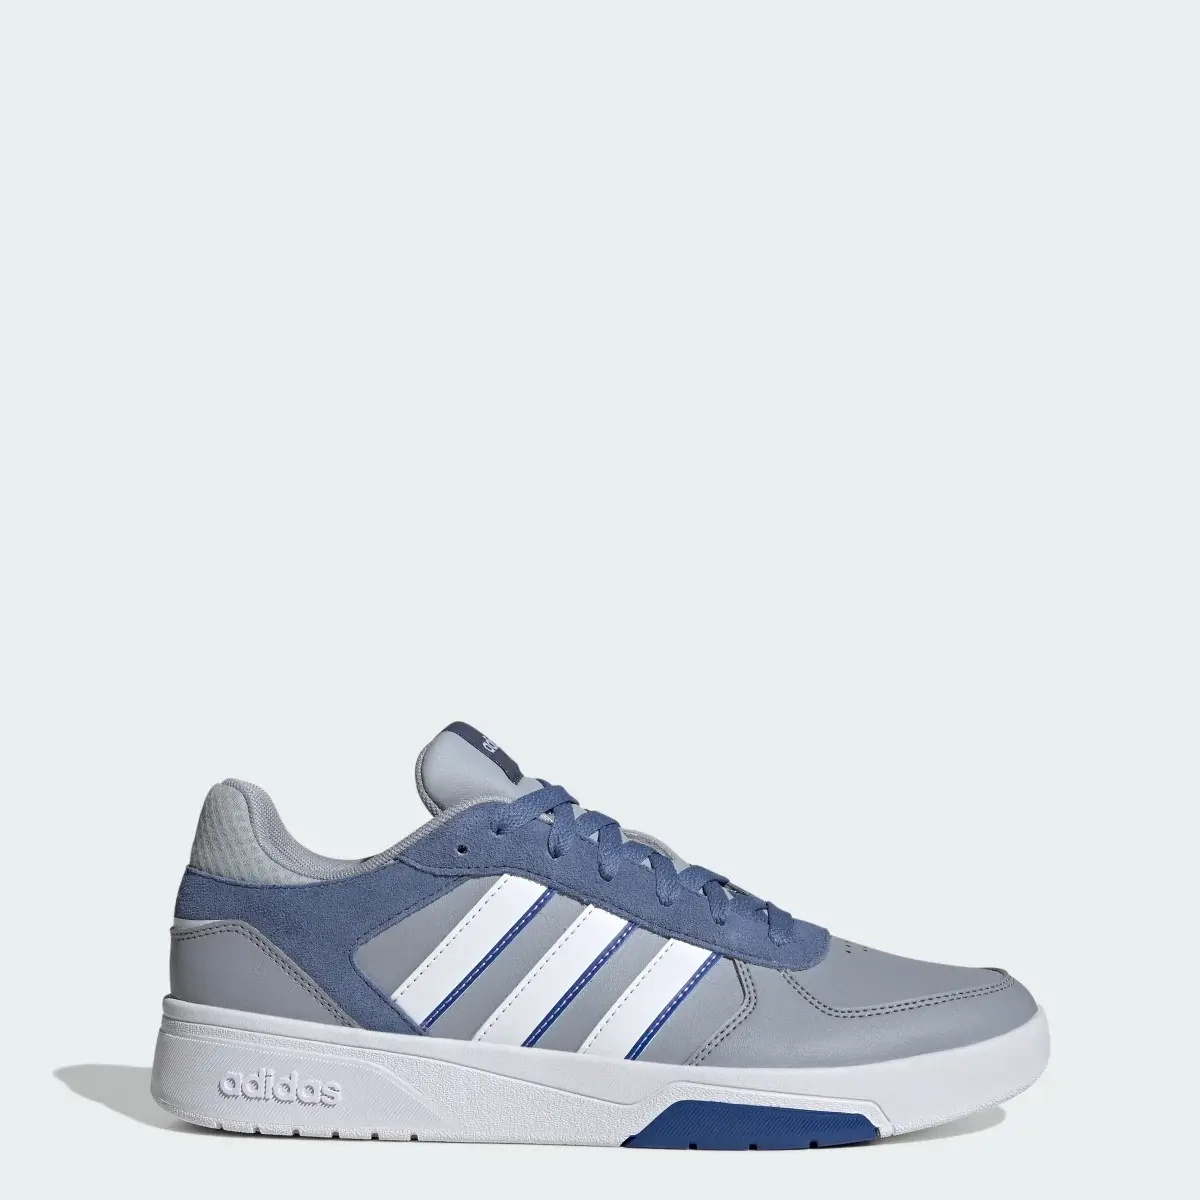 Adidas Courtbeat Shoes. 1